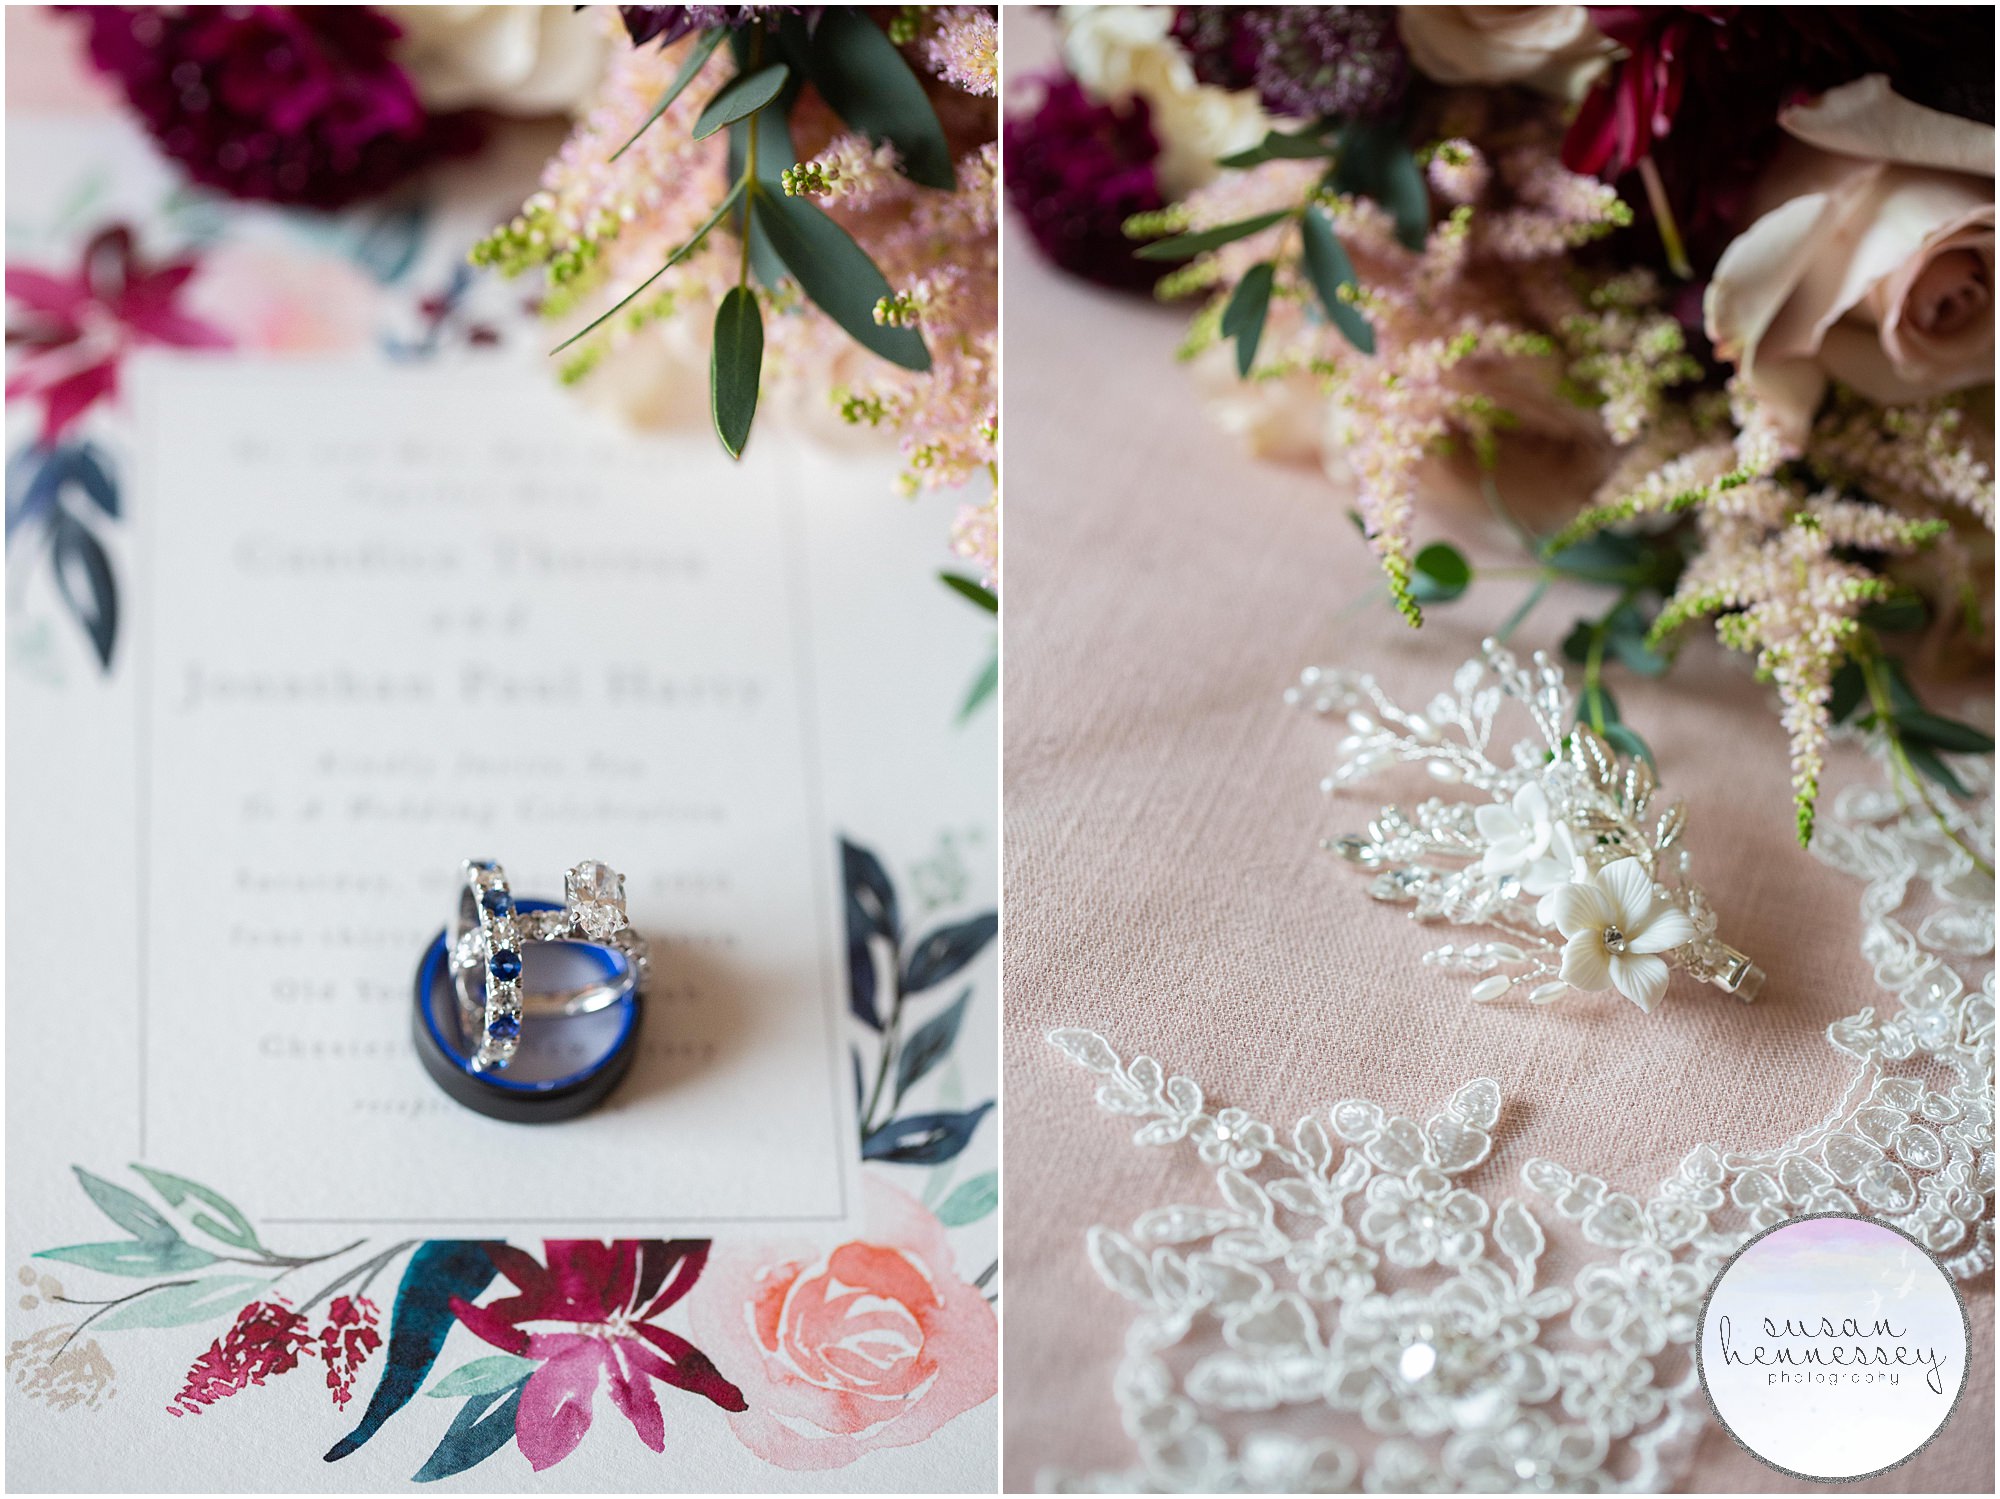 Details of rings, invitation and bride's hair piece for Fall Wedding at Old York Country Club